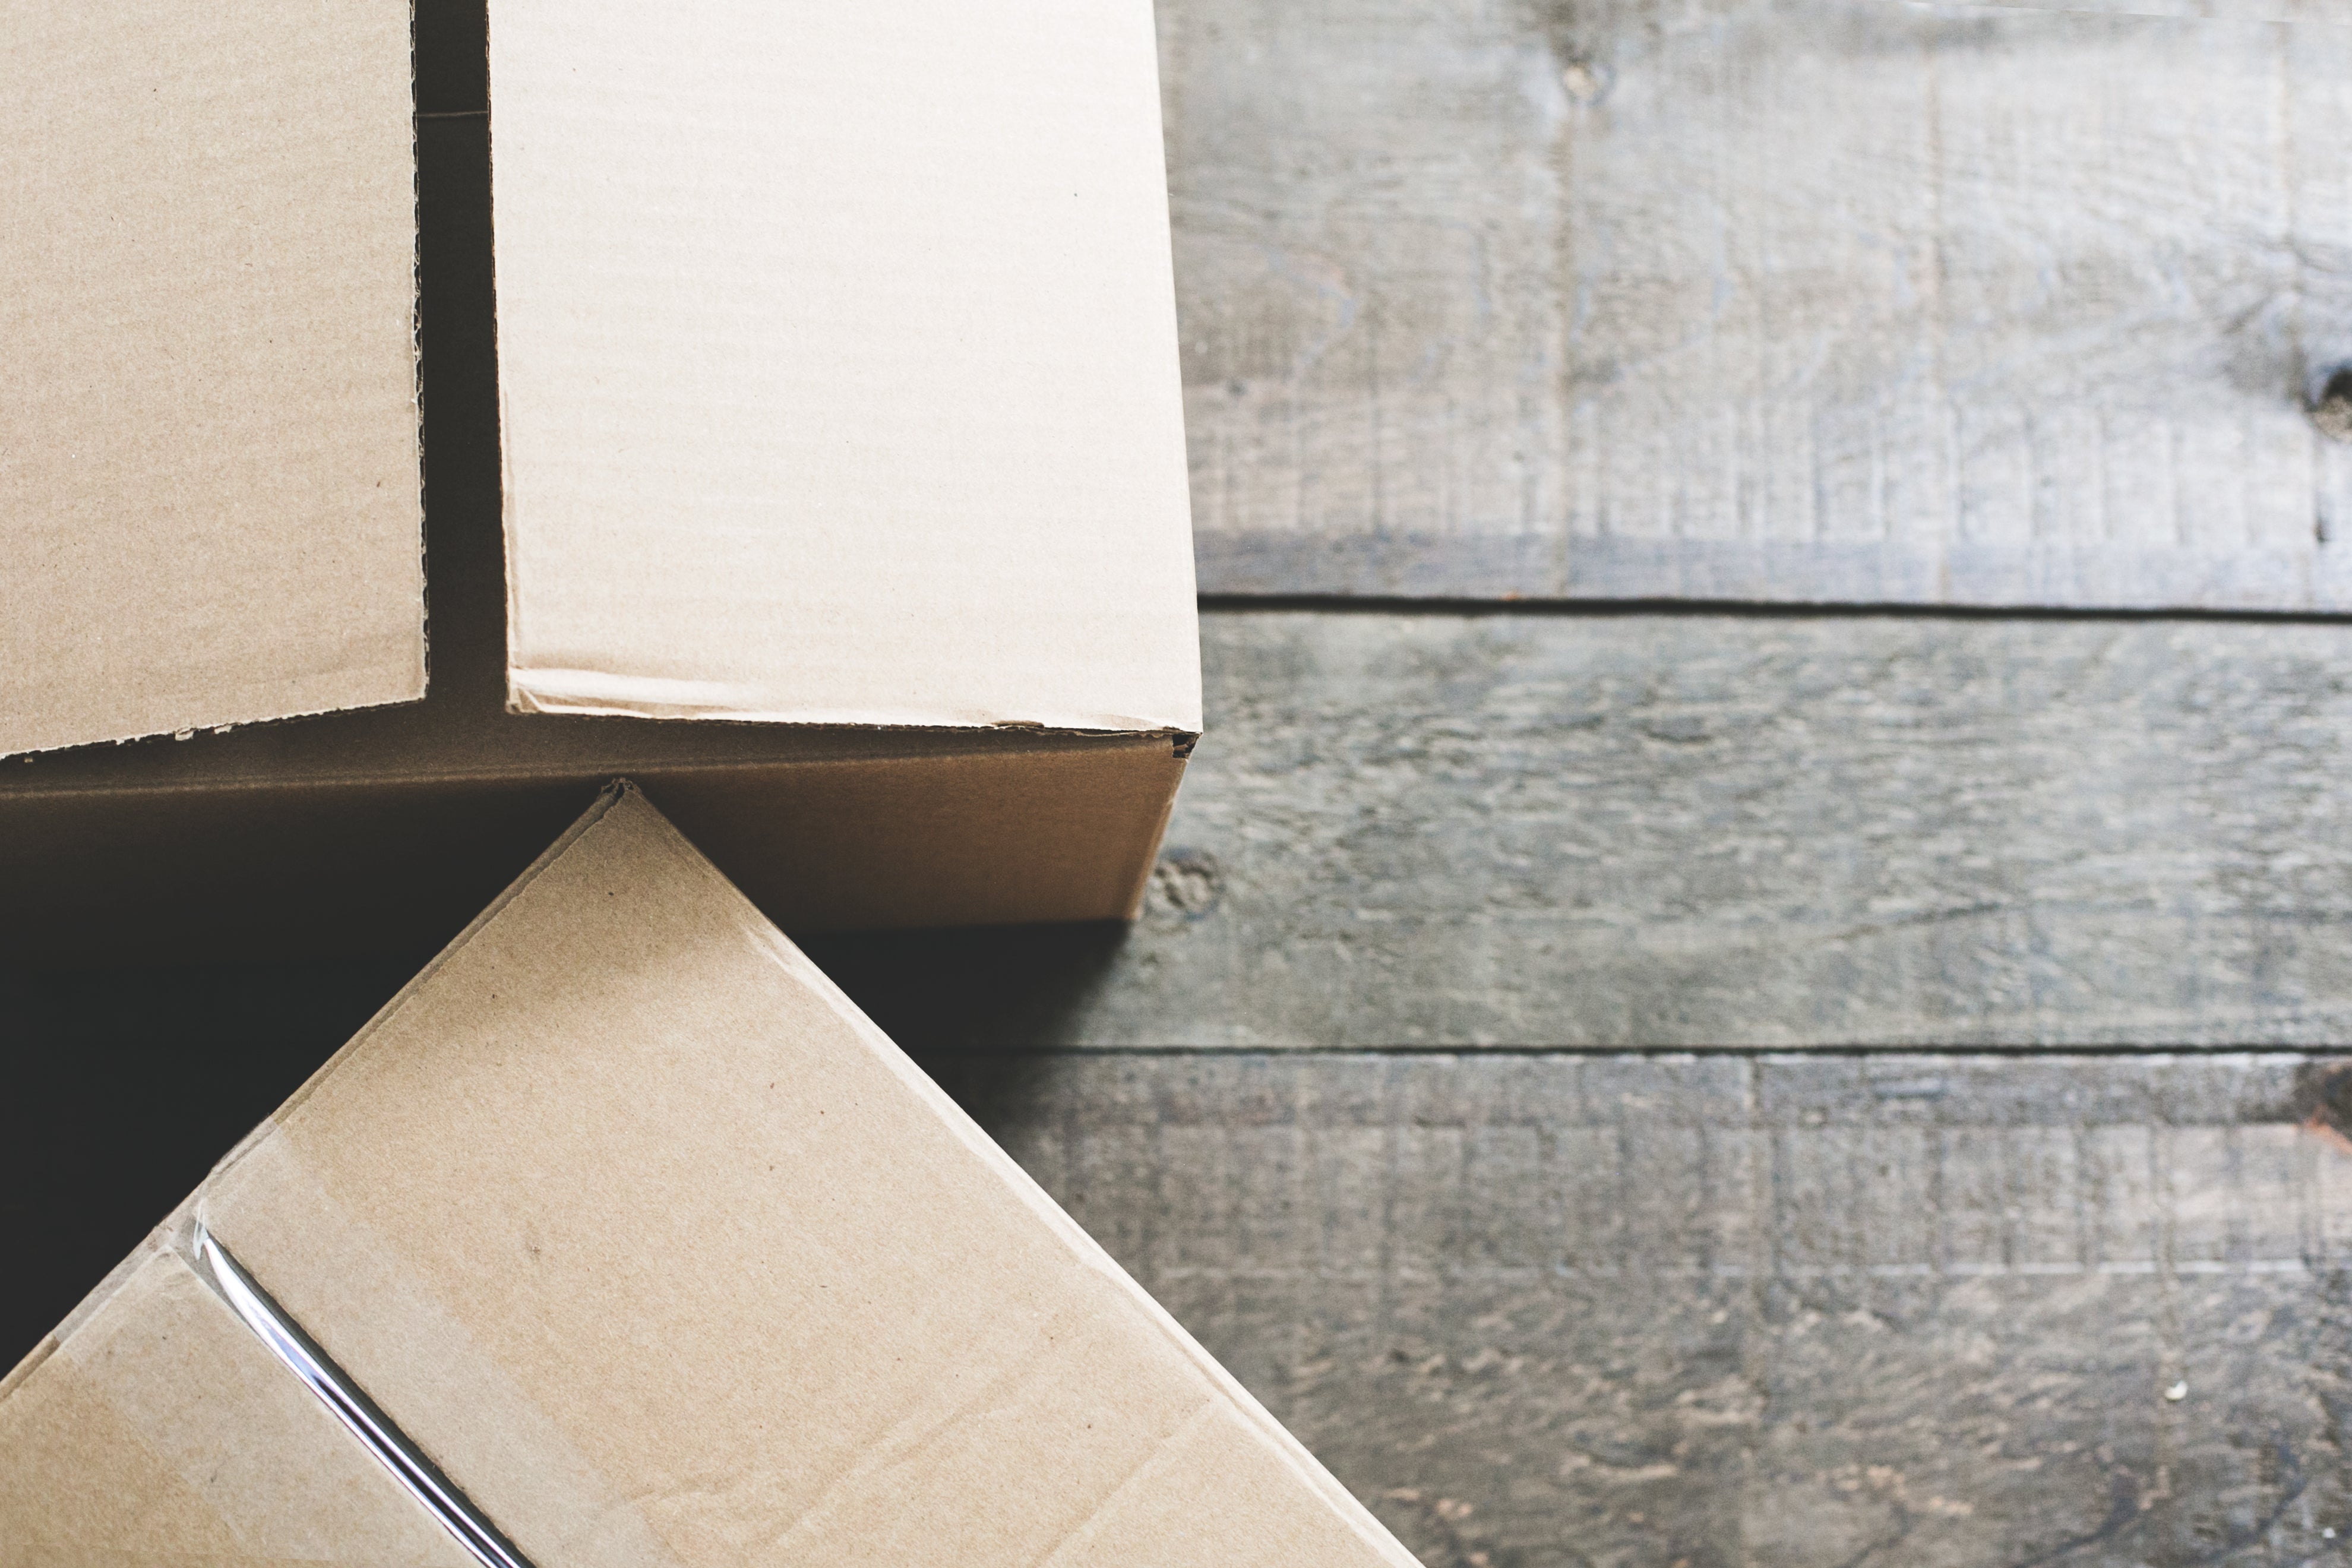 UK Supplier of home removal boxes, buy strong cardboard boxes & packaging materials for self-storage, plus wholesale supply of palletwrap, bubblewrap, furniture removal blankets & moving boxes to trade & removals firms.